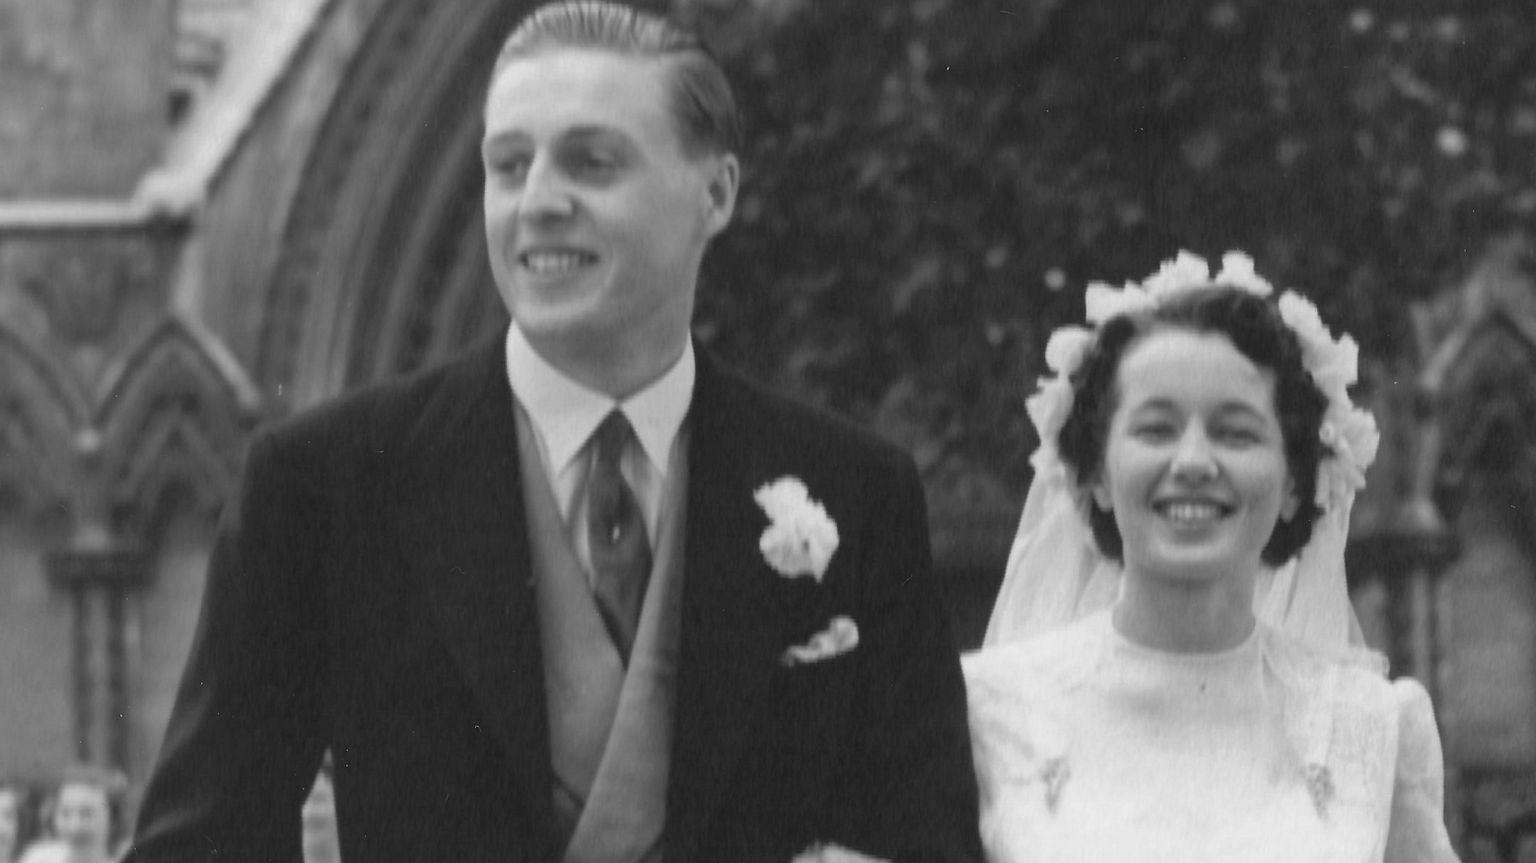 Bill and Cherry's wedding photo. Bill is in a traditional wedding suit and Cherry in a white dress and is wearing a white veil